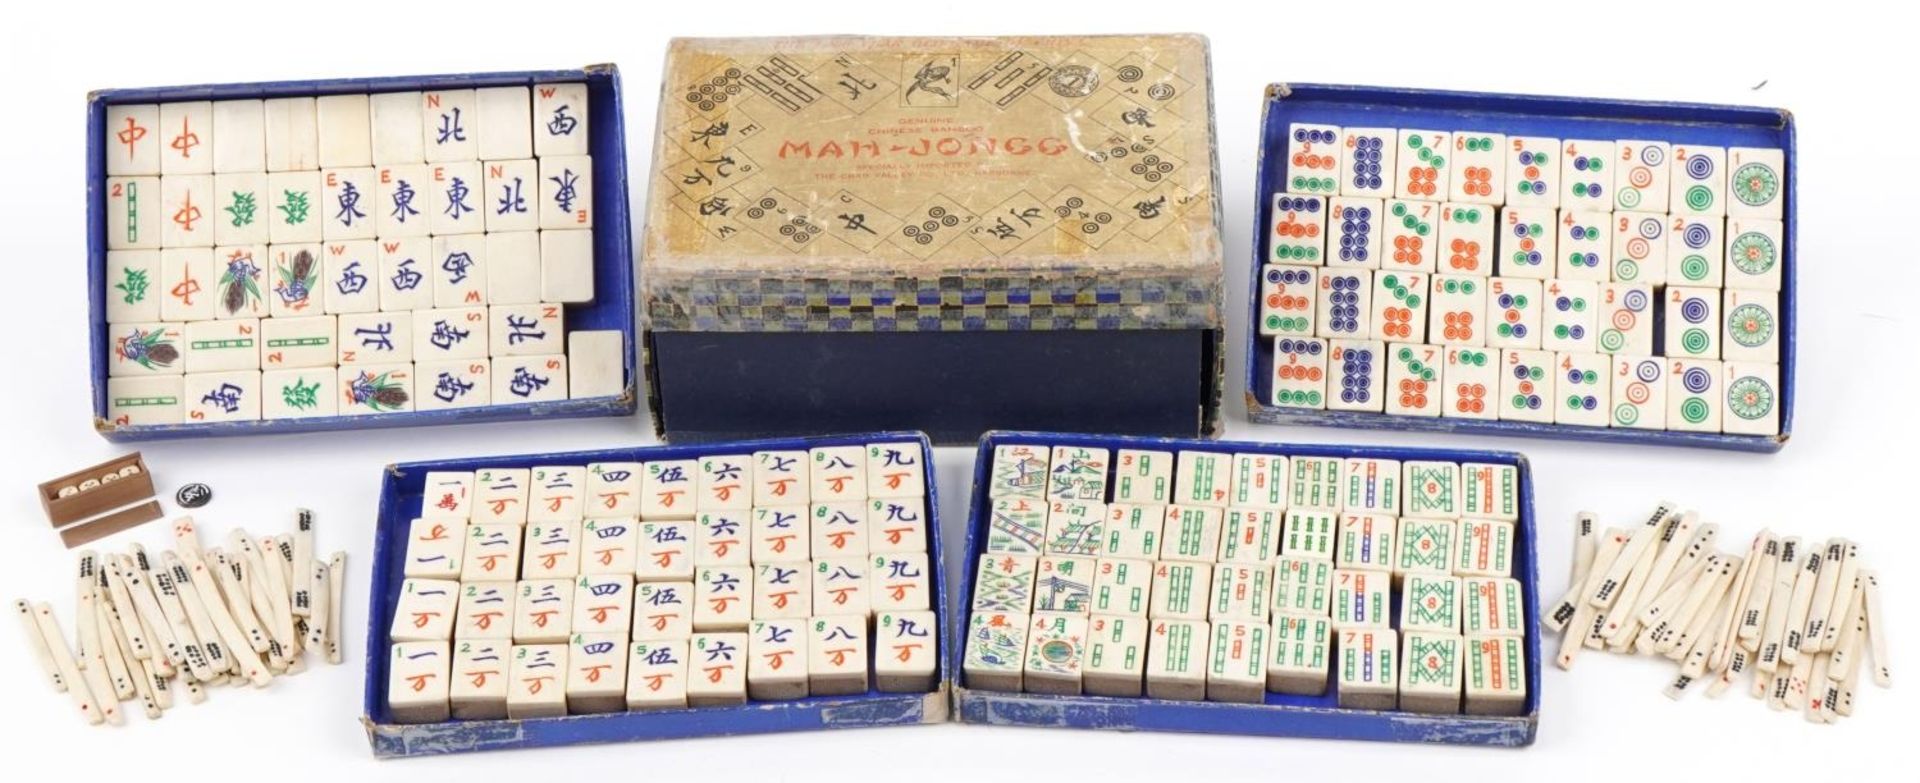 Vintage Chad Valley bone and bamboo mahjong set with case, 21cm wide : For further information on